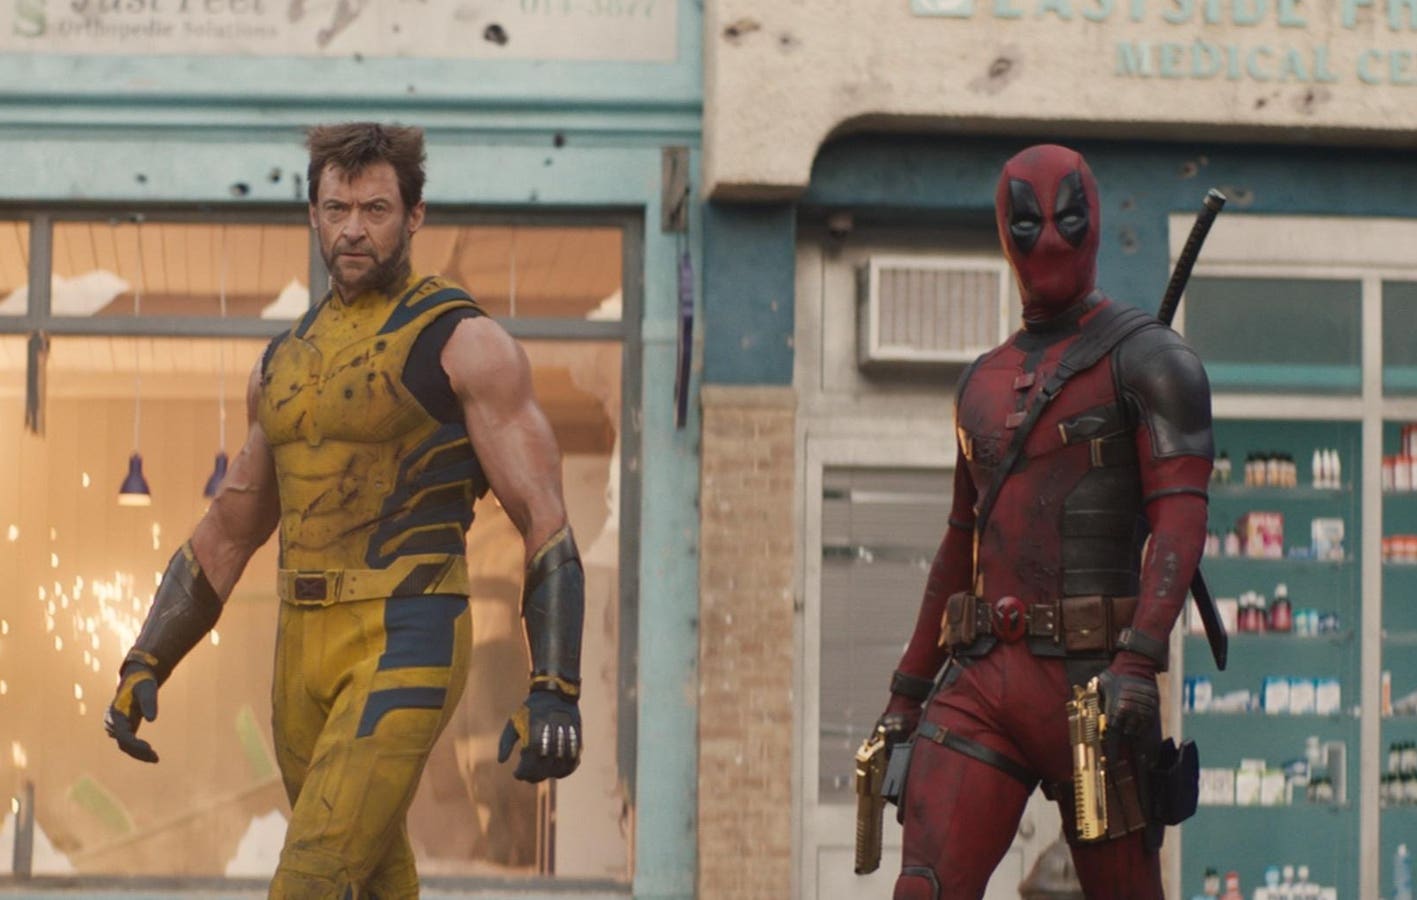 ‘Deadpool & Wolverine’ Trailer Embraces Its R Rating – Leaving PG-13 MCU In The Dust